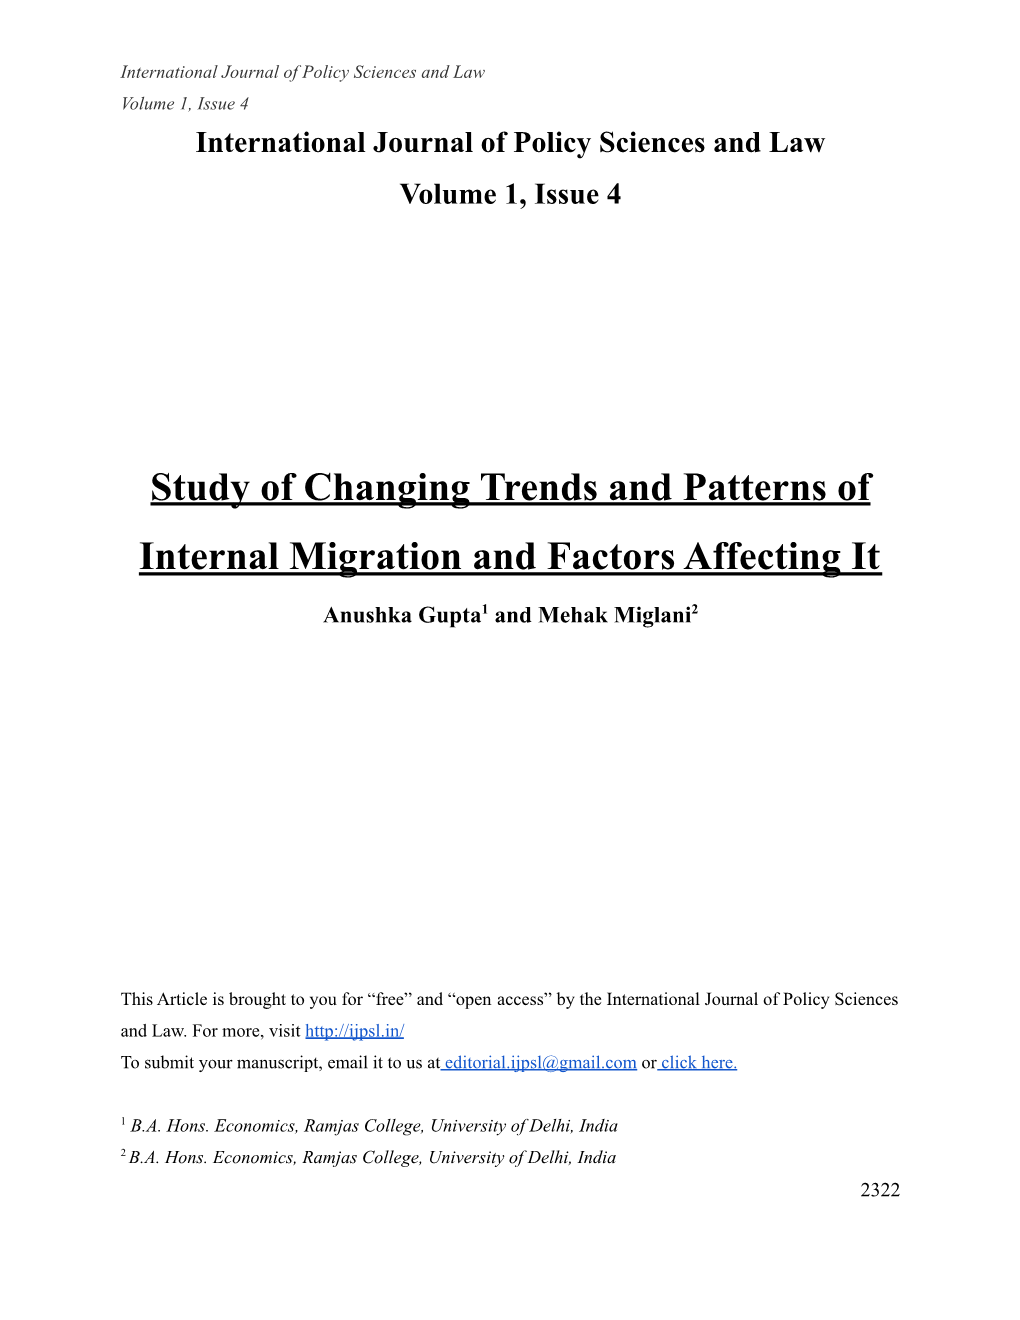 Study of Changing Trends and Patterns of Internal Migration and Factors Affecting It